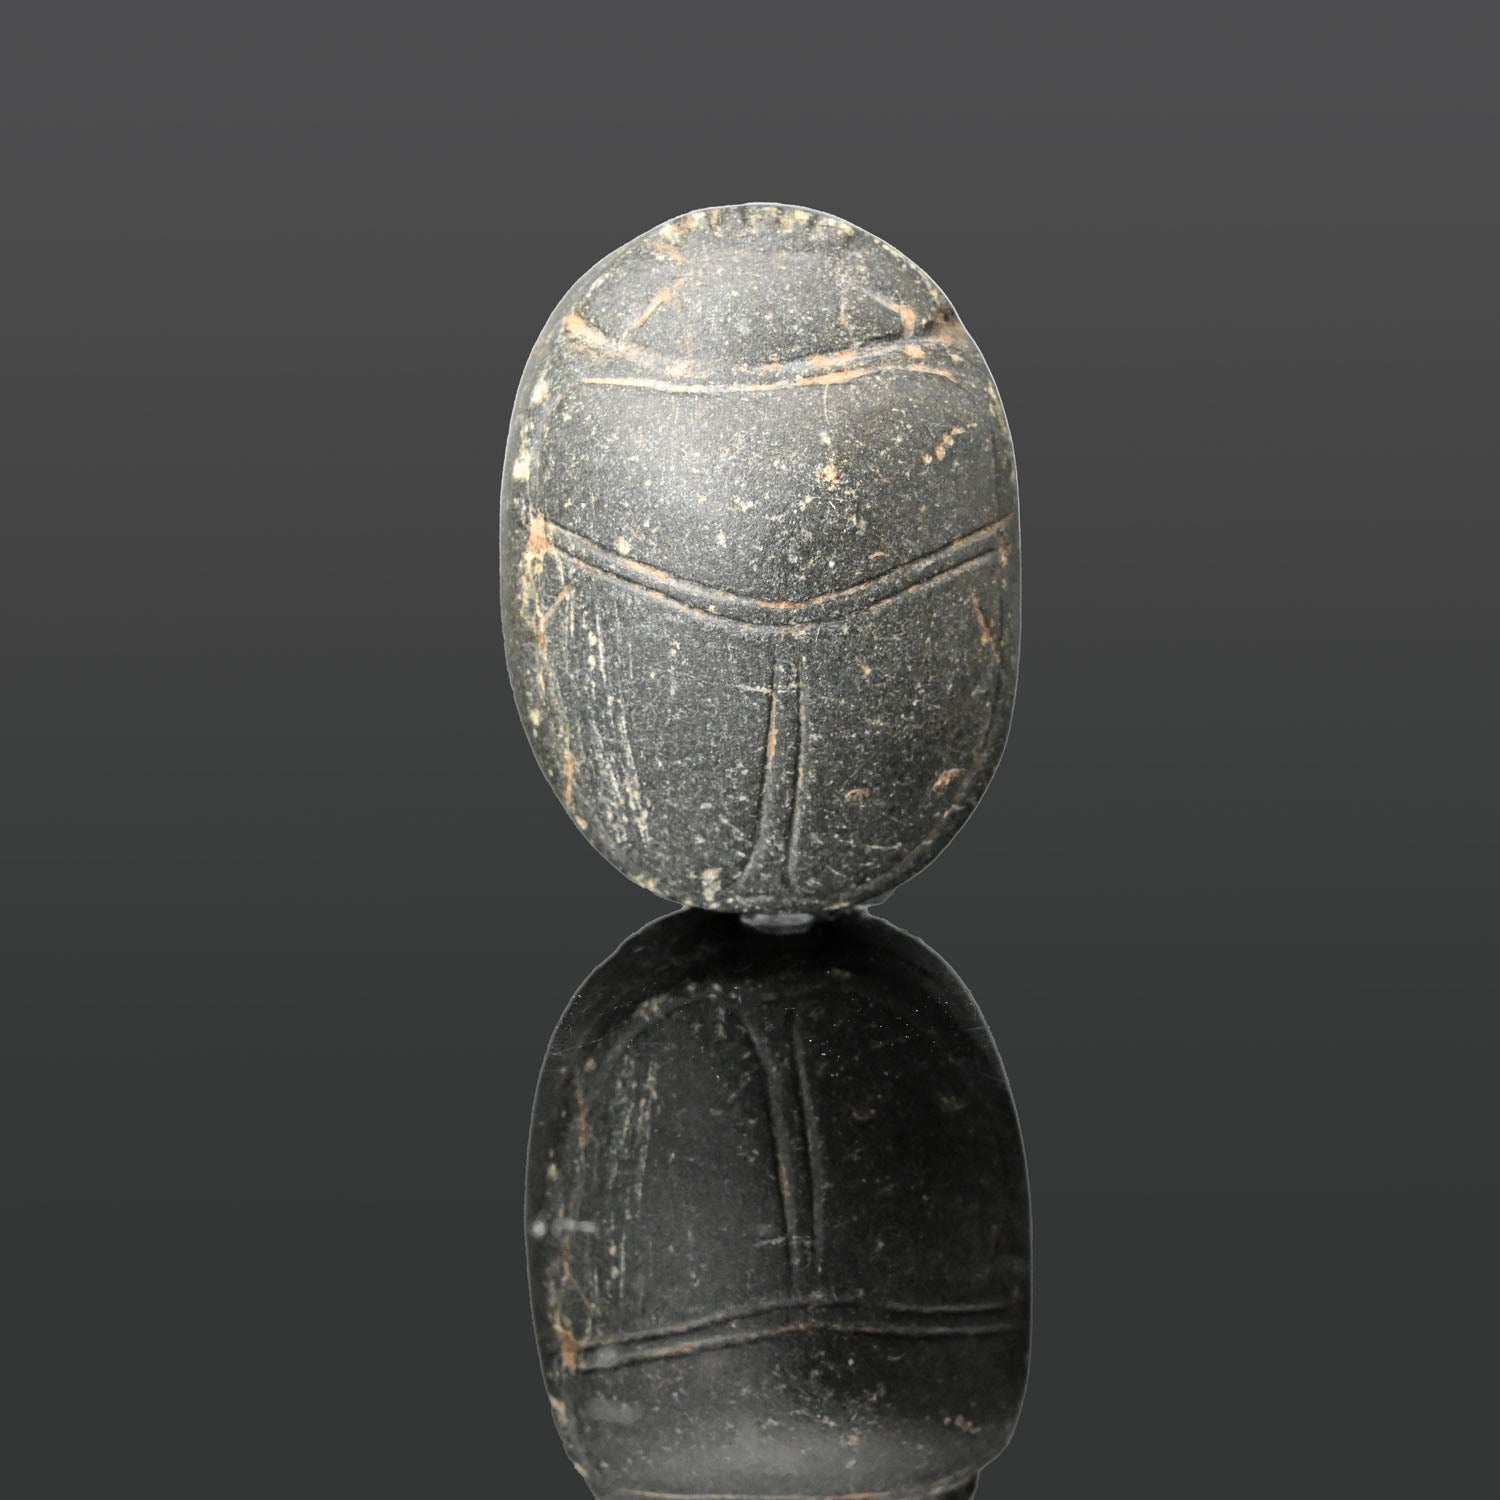 A large Egyptian Greenstone Heart Scarab, Late Period, ca. 664 - 332 BCE